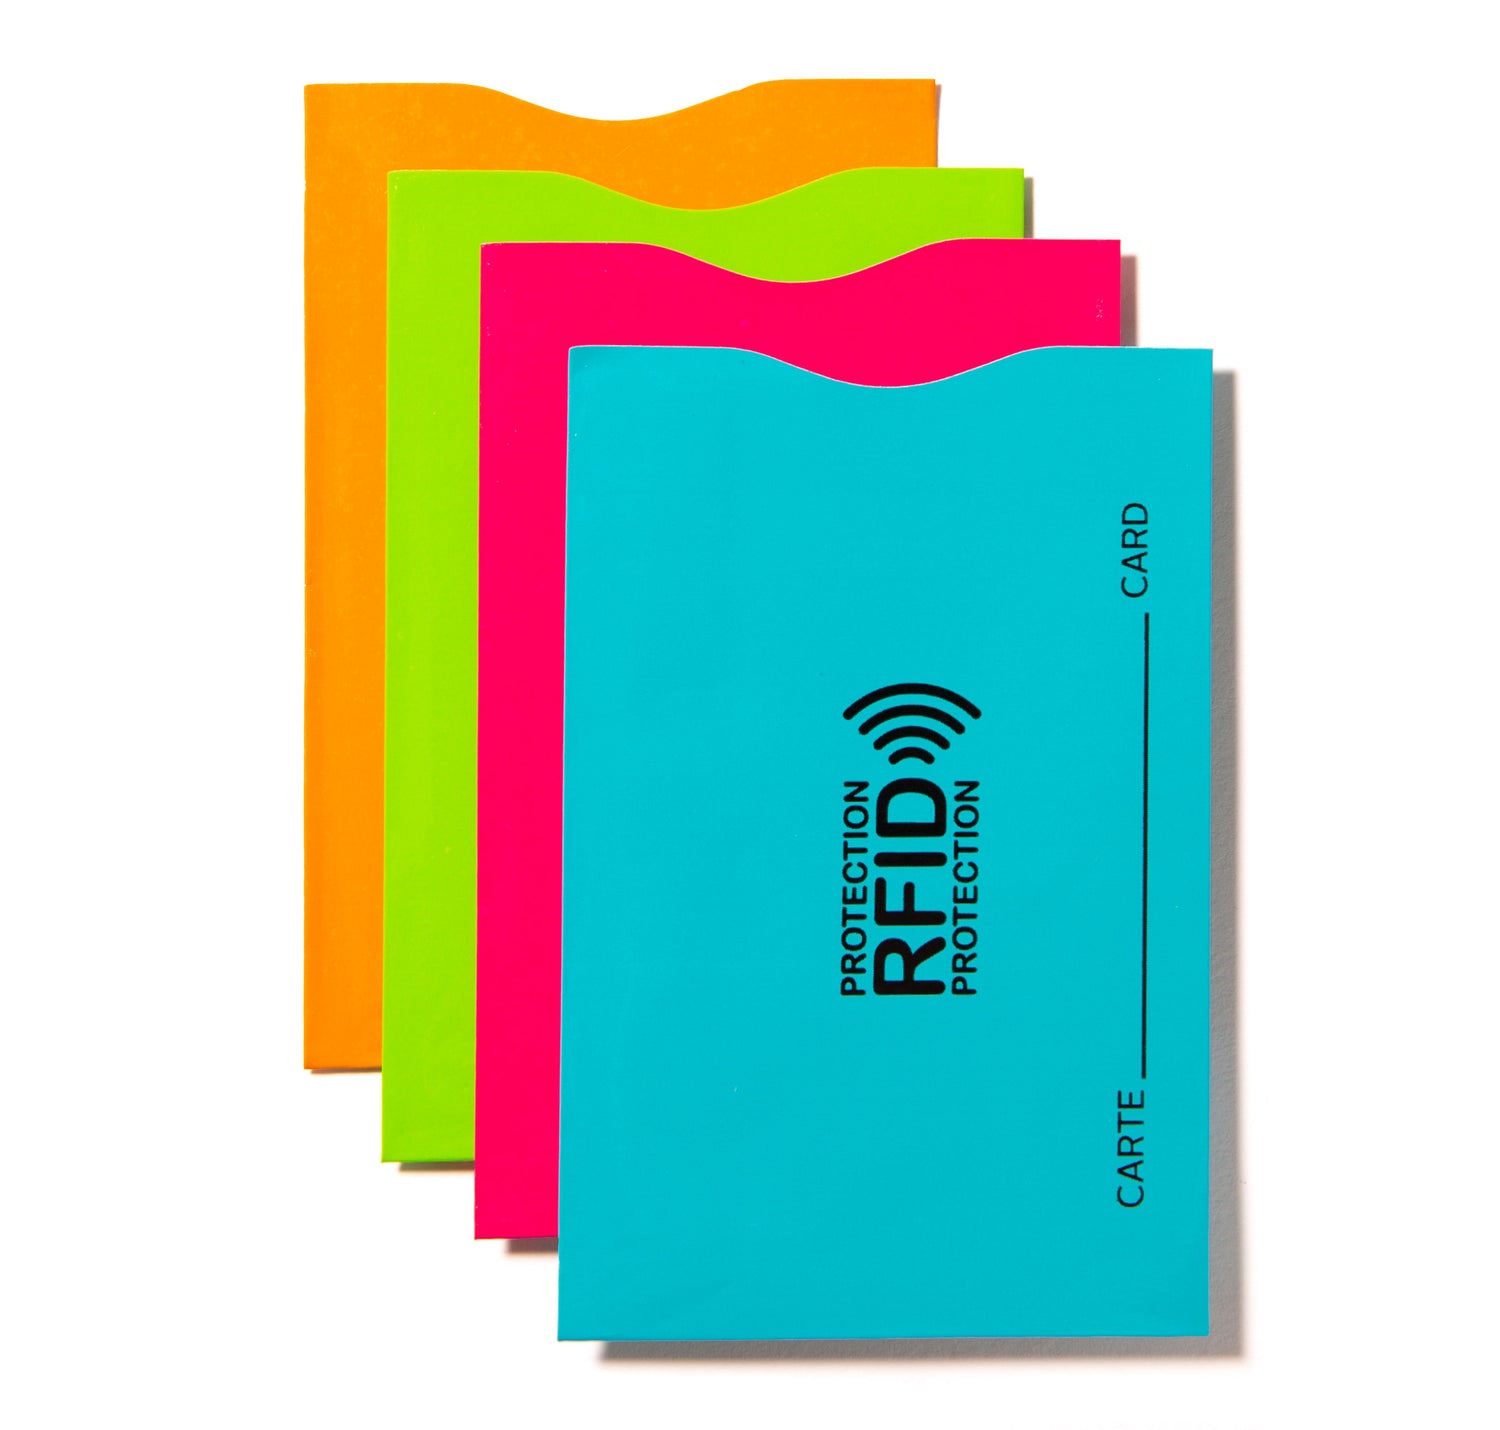 4 RFID card sleeves for travel in orange, green, pink, and blue designed by Tracker showing the RFID label printed on the top 